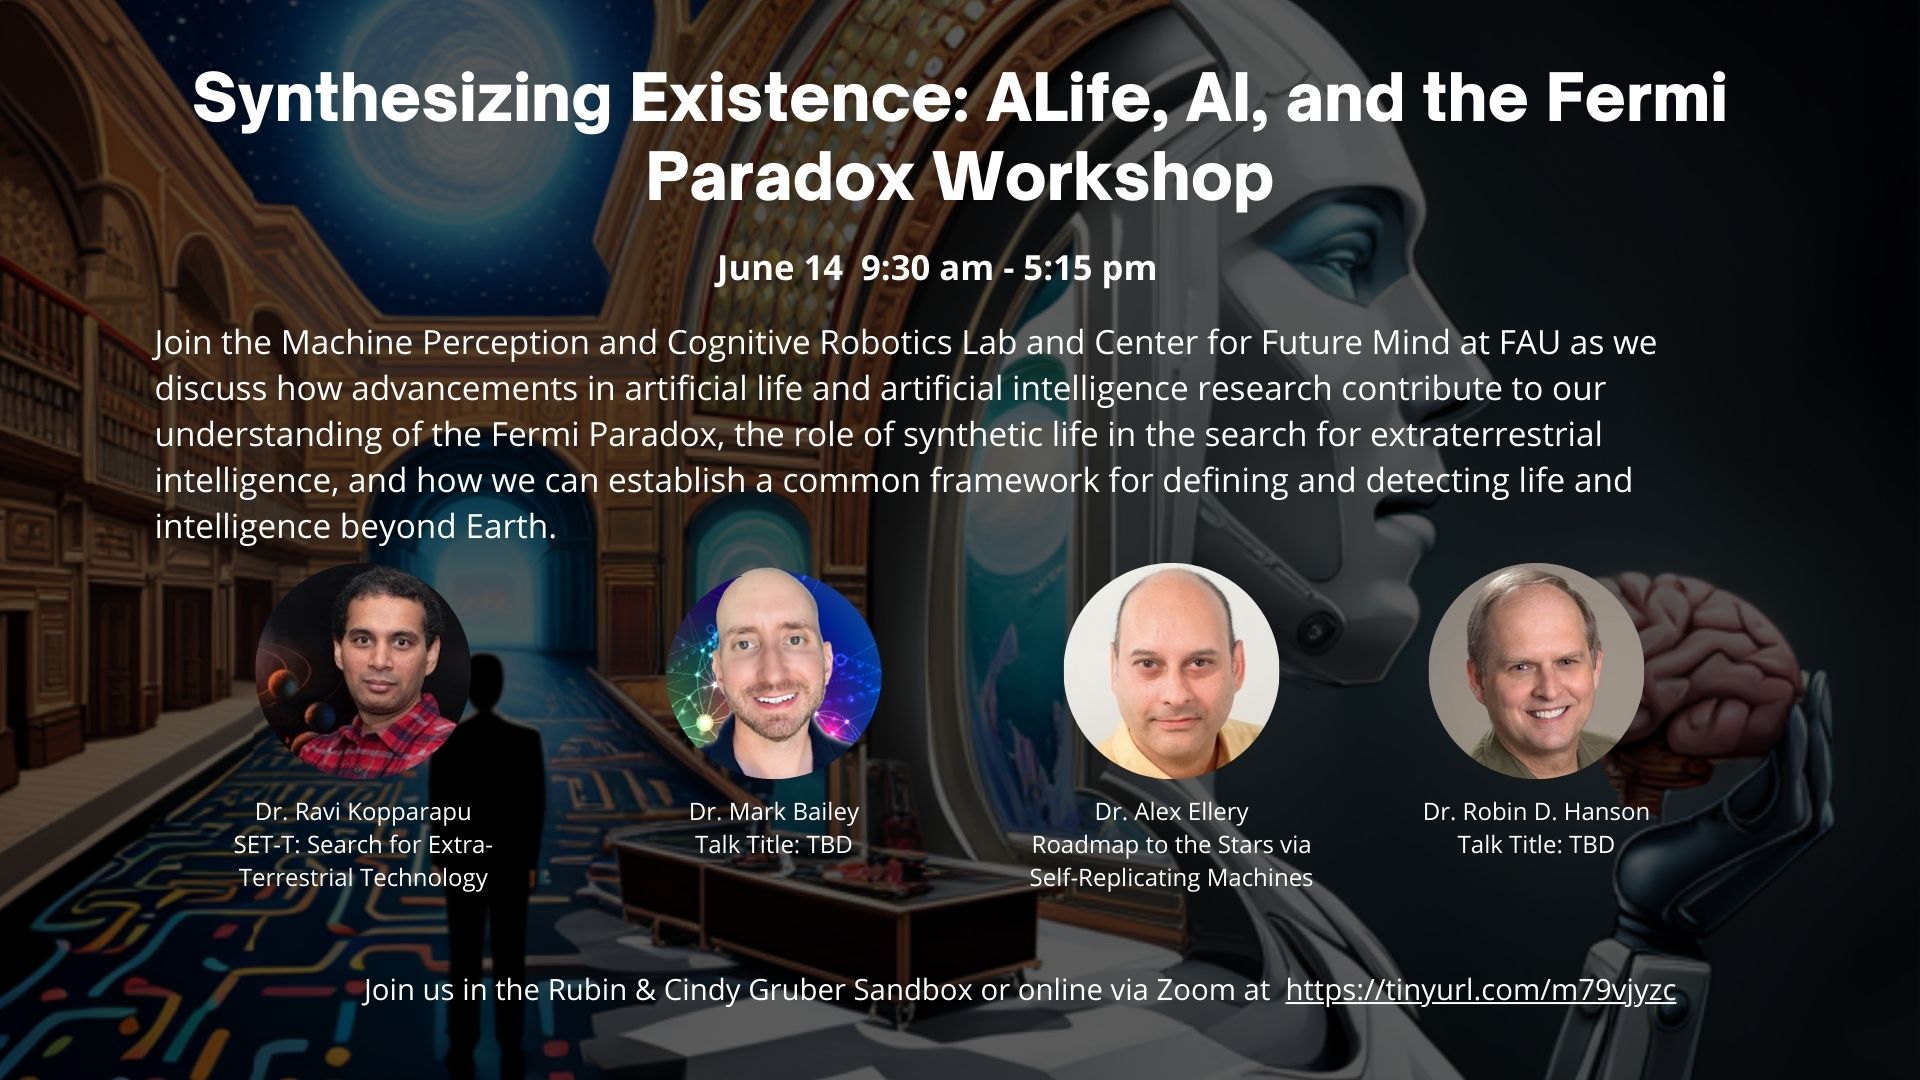 Synthesizing Existence: ALife, AI, and the Fermi Paradox